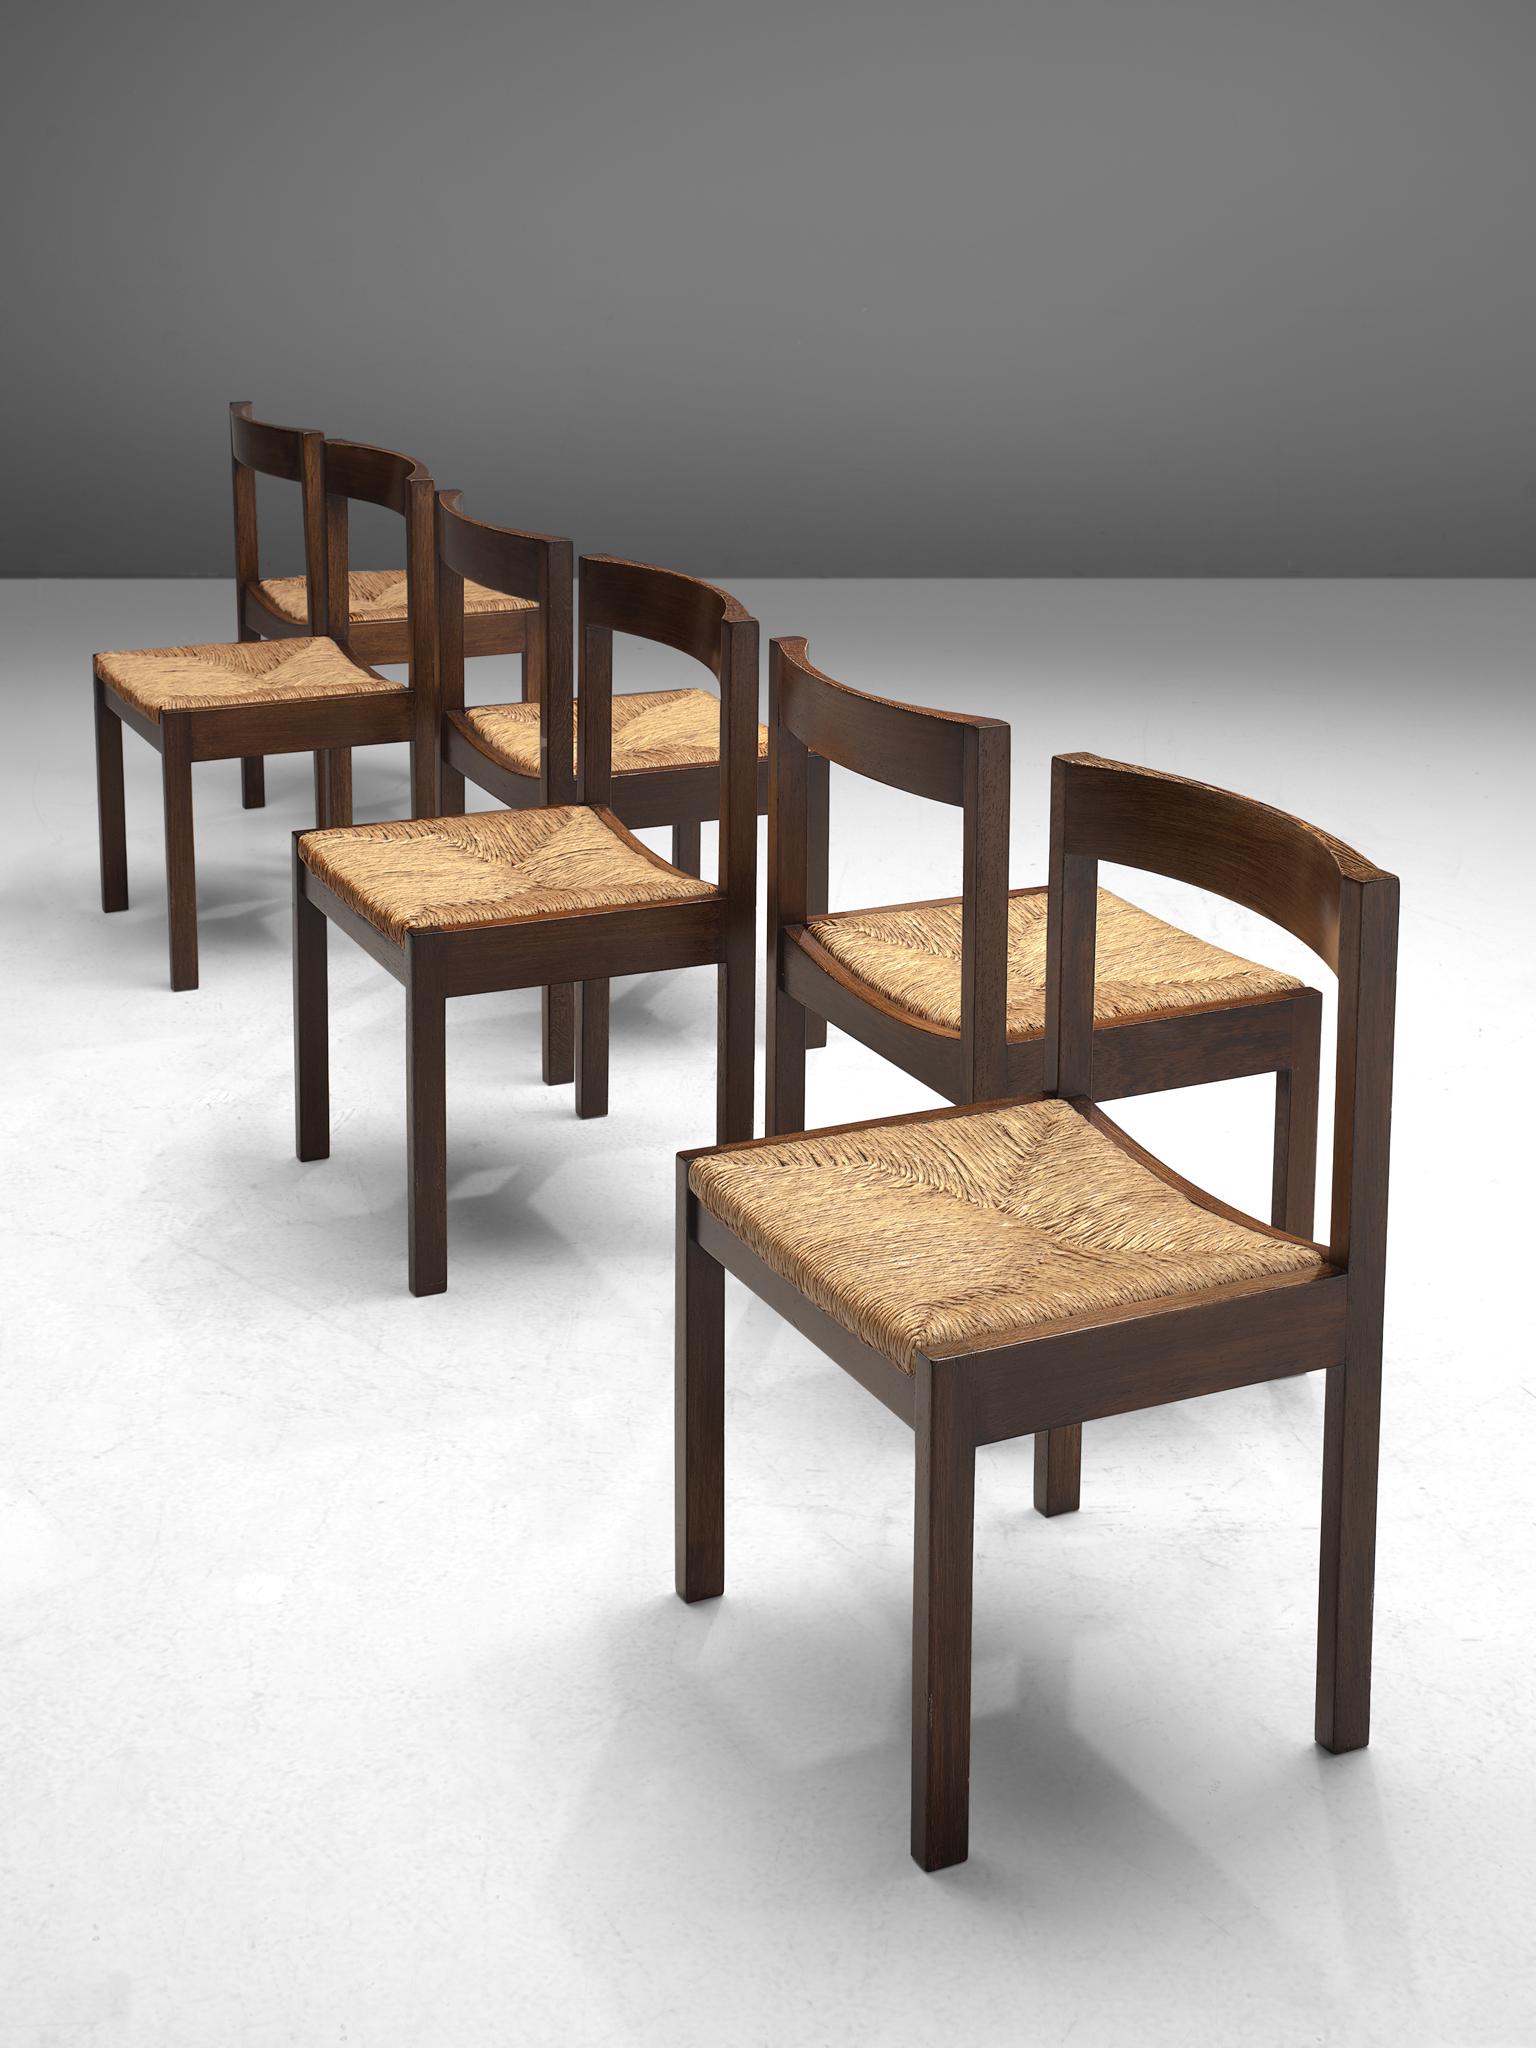 Set of 6 dining chairs, wengé, straw, The Netherlands, 1960s

Dutch set of dining chairs designed in the 1960s. The frame is made of wengé and features straight lines with the backrest slightly curved. The hand-crafted straw seat shows the beauty of